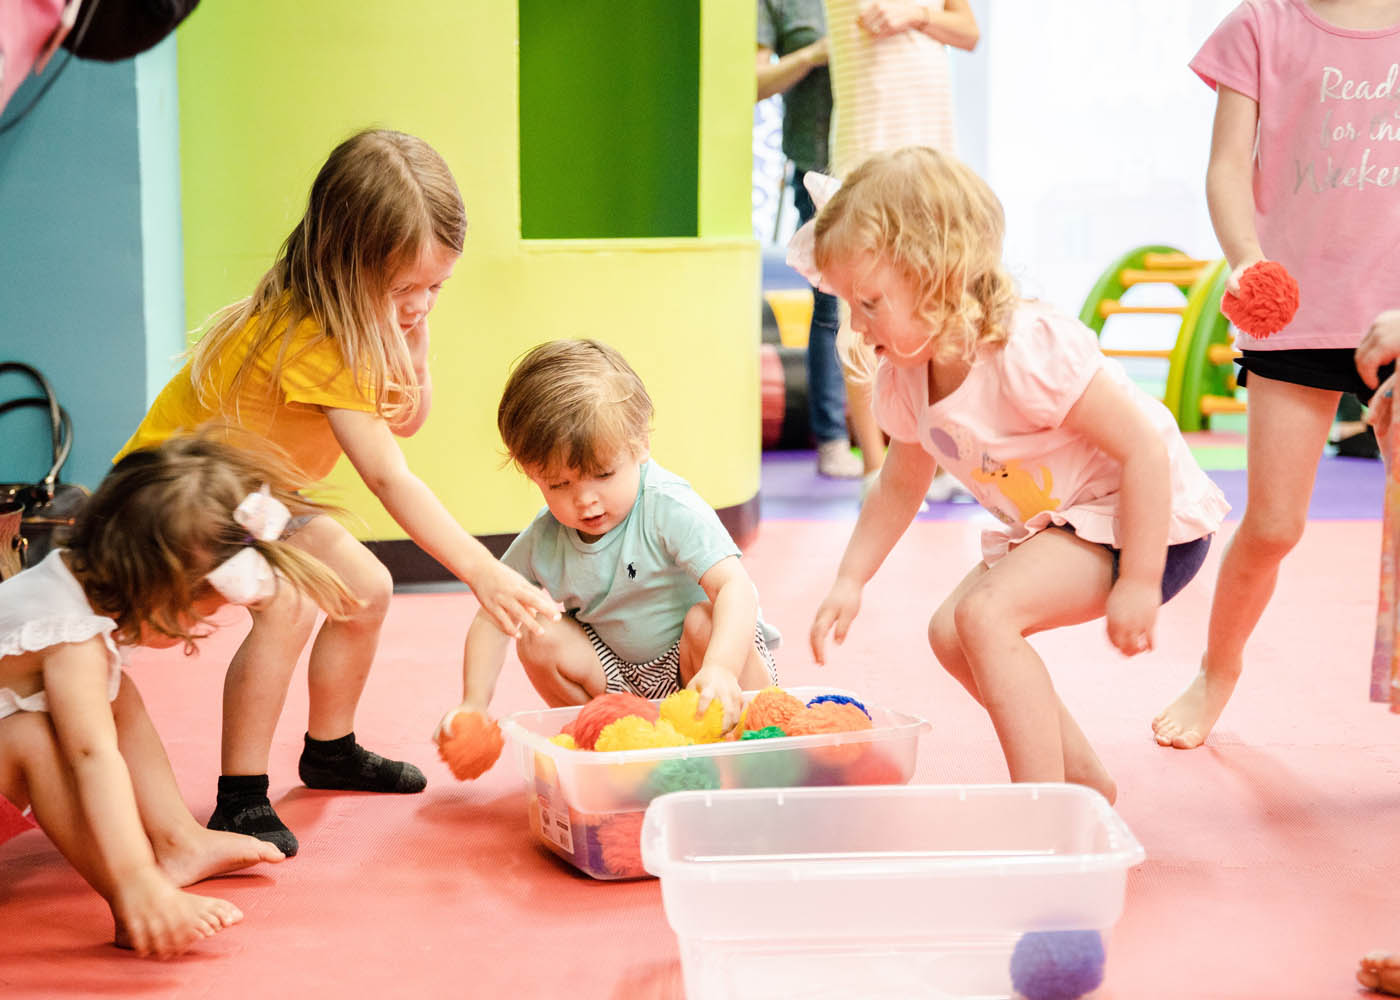 A mixed age group of boys and girls playing in Romp n' Roll's gym, contact us today for our childrens events in Wethersfield, CT.